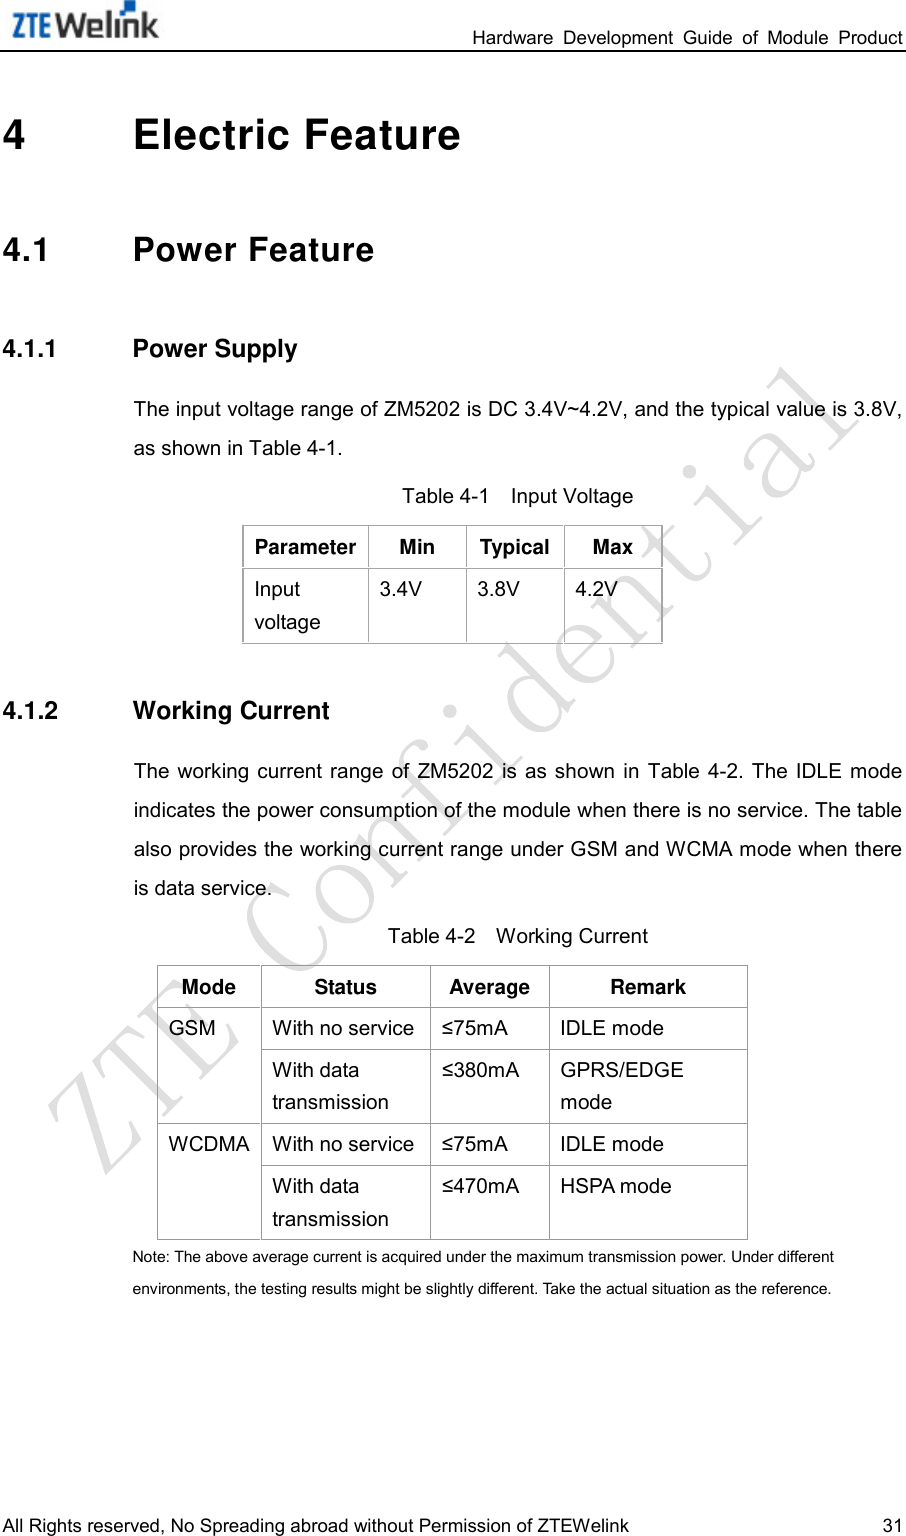                                                                 Hardware  Development  Guide  of  Module  Product All Rights reserved, No Spreading abroad without Permission of ZTEWelink 31 4  Electric Feature 4.1 Power Feature 4.1.1 Power Supply The input voltage range of ZM5202 is DC 3.4V~4.2V, and the typical value is 3.8V, as shown in Table 4-1.   Table 4-1    Input Voltage Parameter Min Typical Max Input voltage 3.4V 3.8V 4.2V 4.1.2 Working Current The  working current range of ZM5202 is as shown in Table  4-2.  The  IDLE mode indicates the power consumption of the module when there is no service. The table also provides the working current range under GSM and WCMA mode when there is data service.   Table 4-2    Working Current Mode Status Average Remark GSM With no service ≤75mA IDLE mode With data transmission ≤380mA GPRS/EDGE mode WCDMA With no service ≤75mA IDLE mode With data transmission ≤470mA HSPA mode Note: The above average current is acquired under the maximum transmission power. Under different environments, the testing results might be slightly different. Take the actual situation as the reference.    